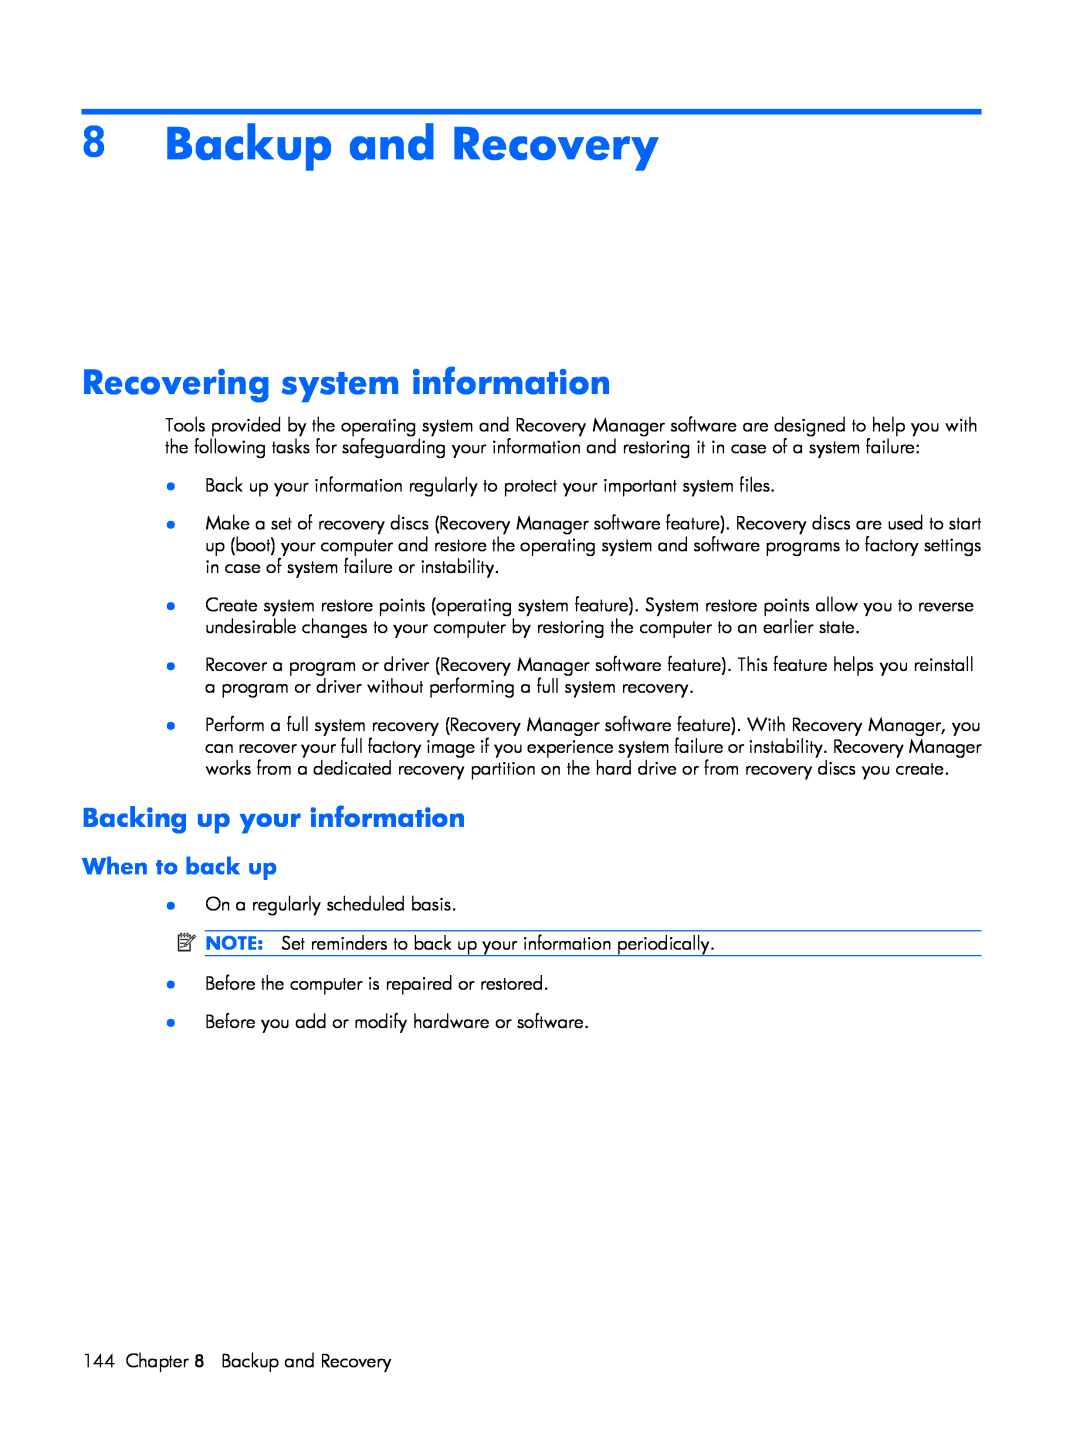 HP V3624TU, V3523TU, V3700 Backup and Recovery, Recovering system information, Backing up your information, When to back up 